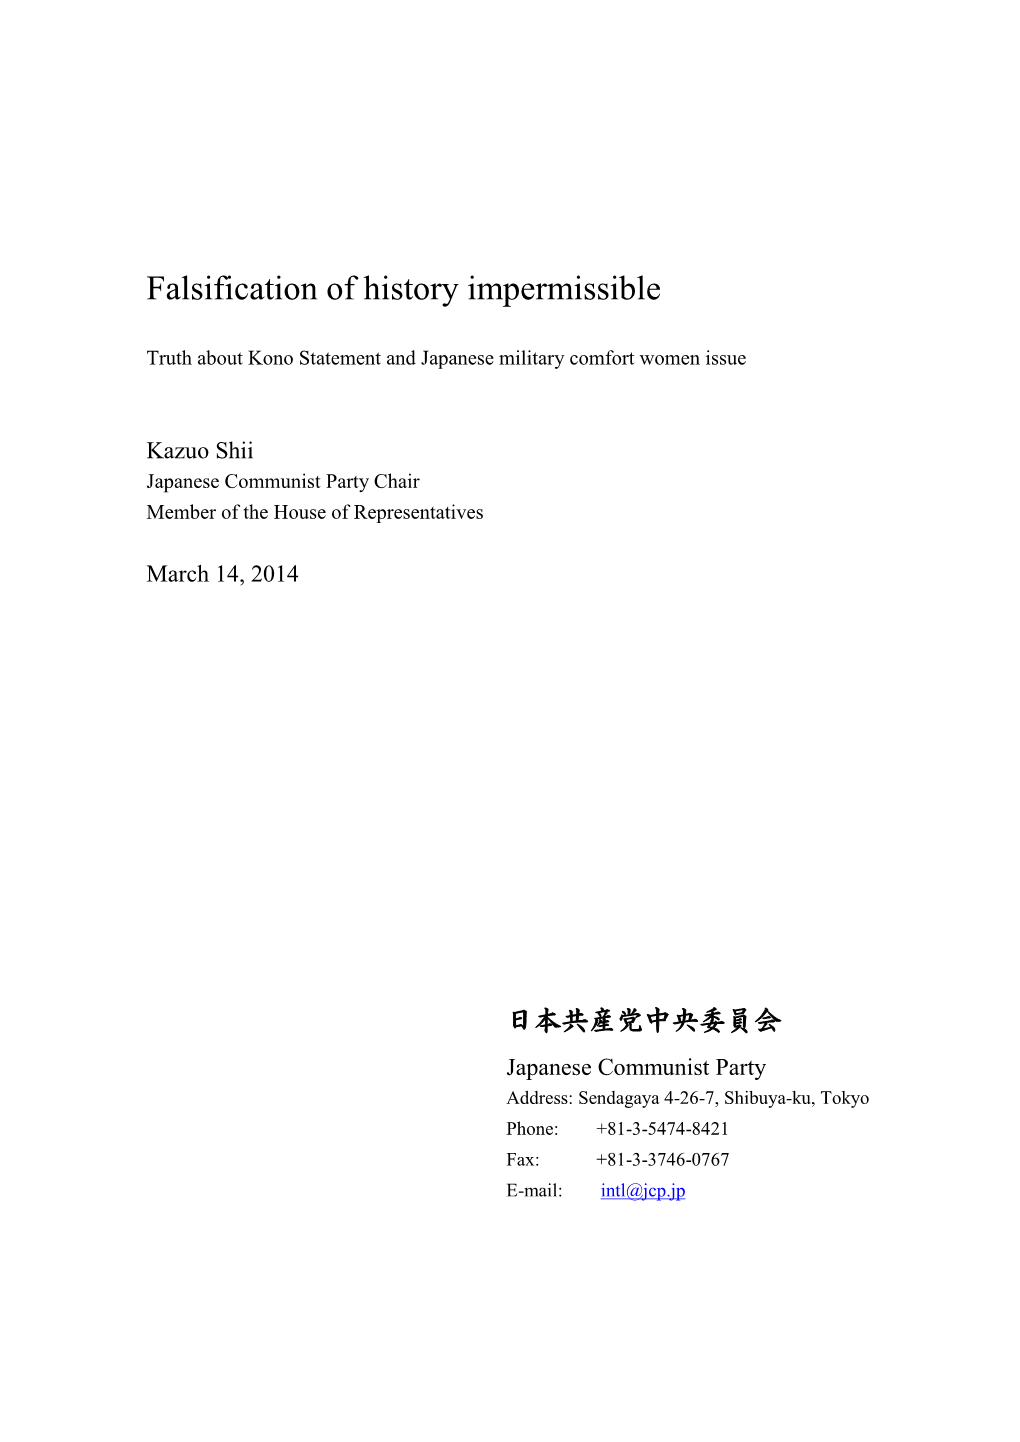 Falsification of History Impermissible--Truth